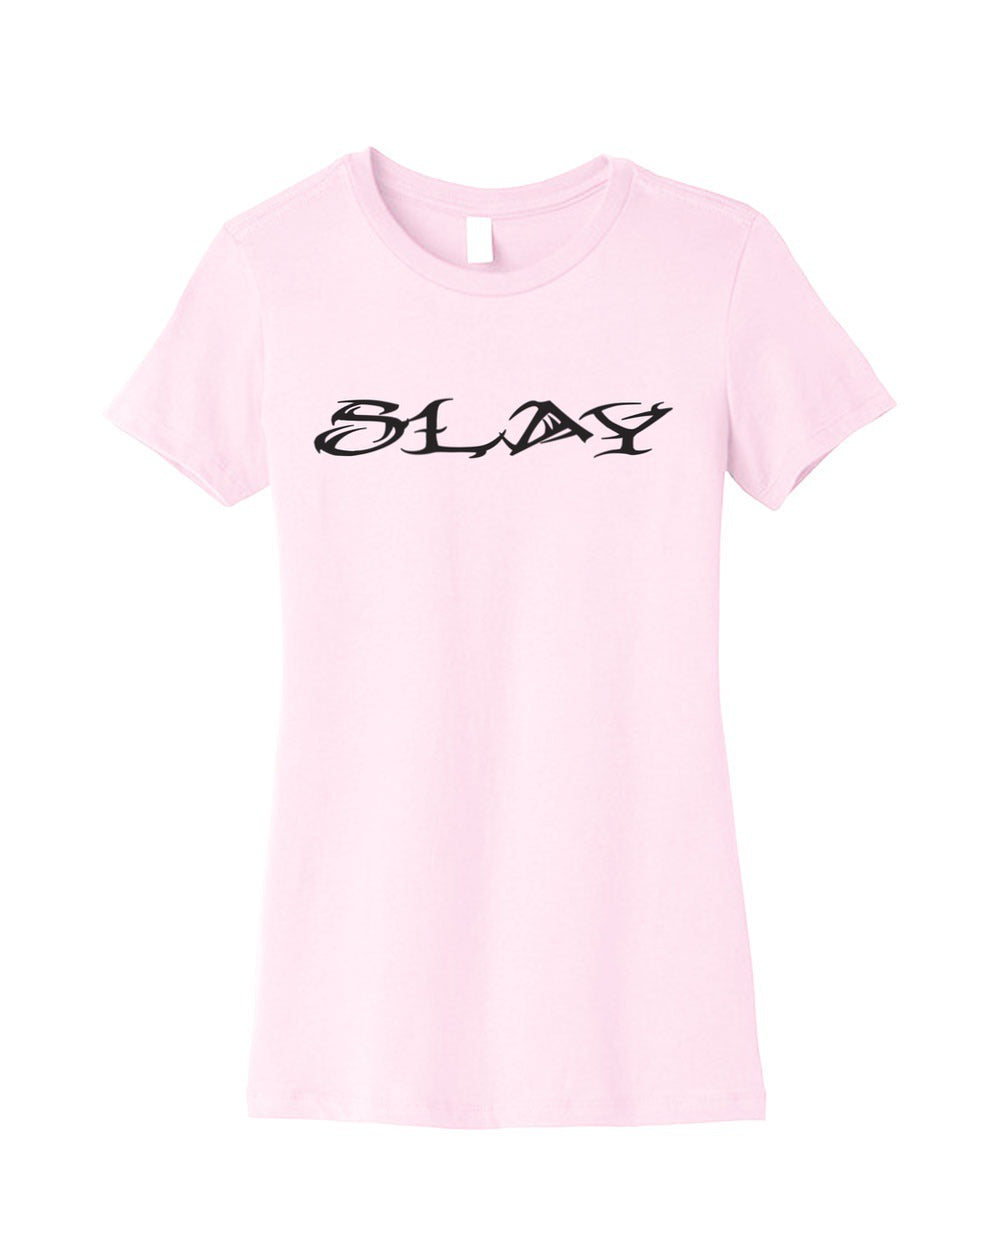 Slay | Fitted Tee